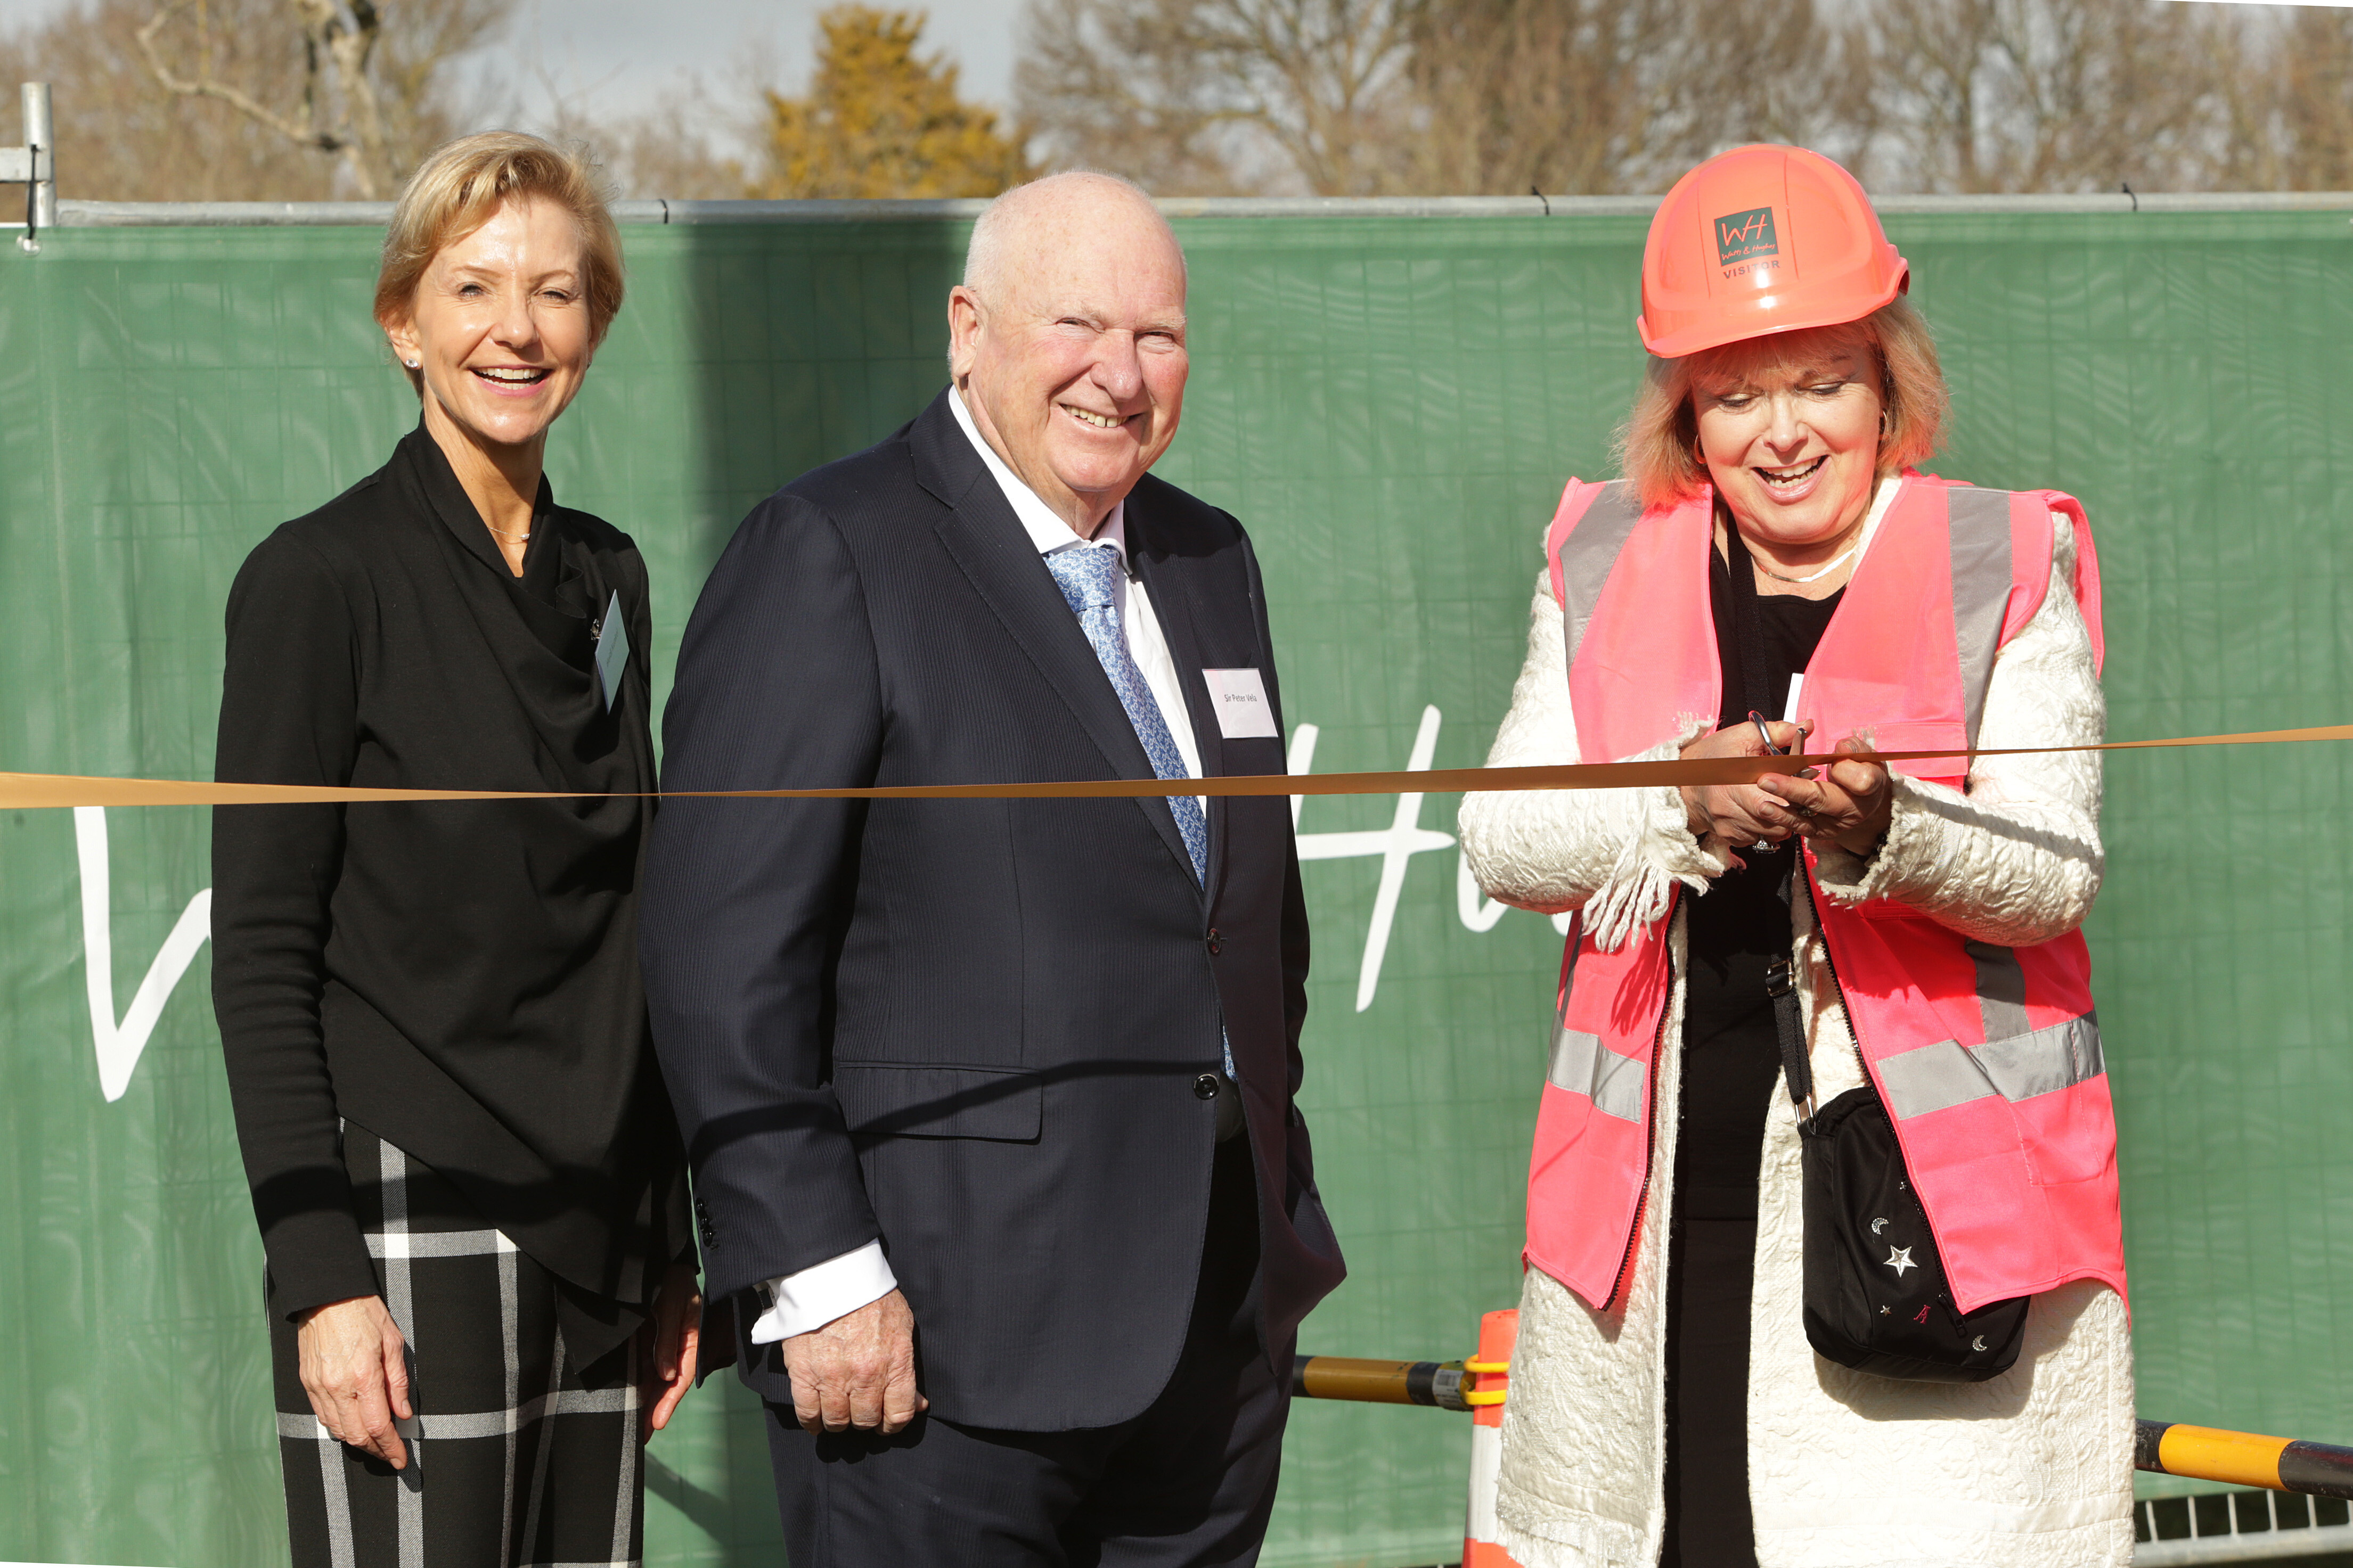 Hilton VP Heidi Kunkel, Sir Peter Vela, and Hon. Judith Collins at the official groundbreaking ceremony